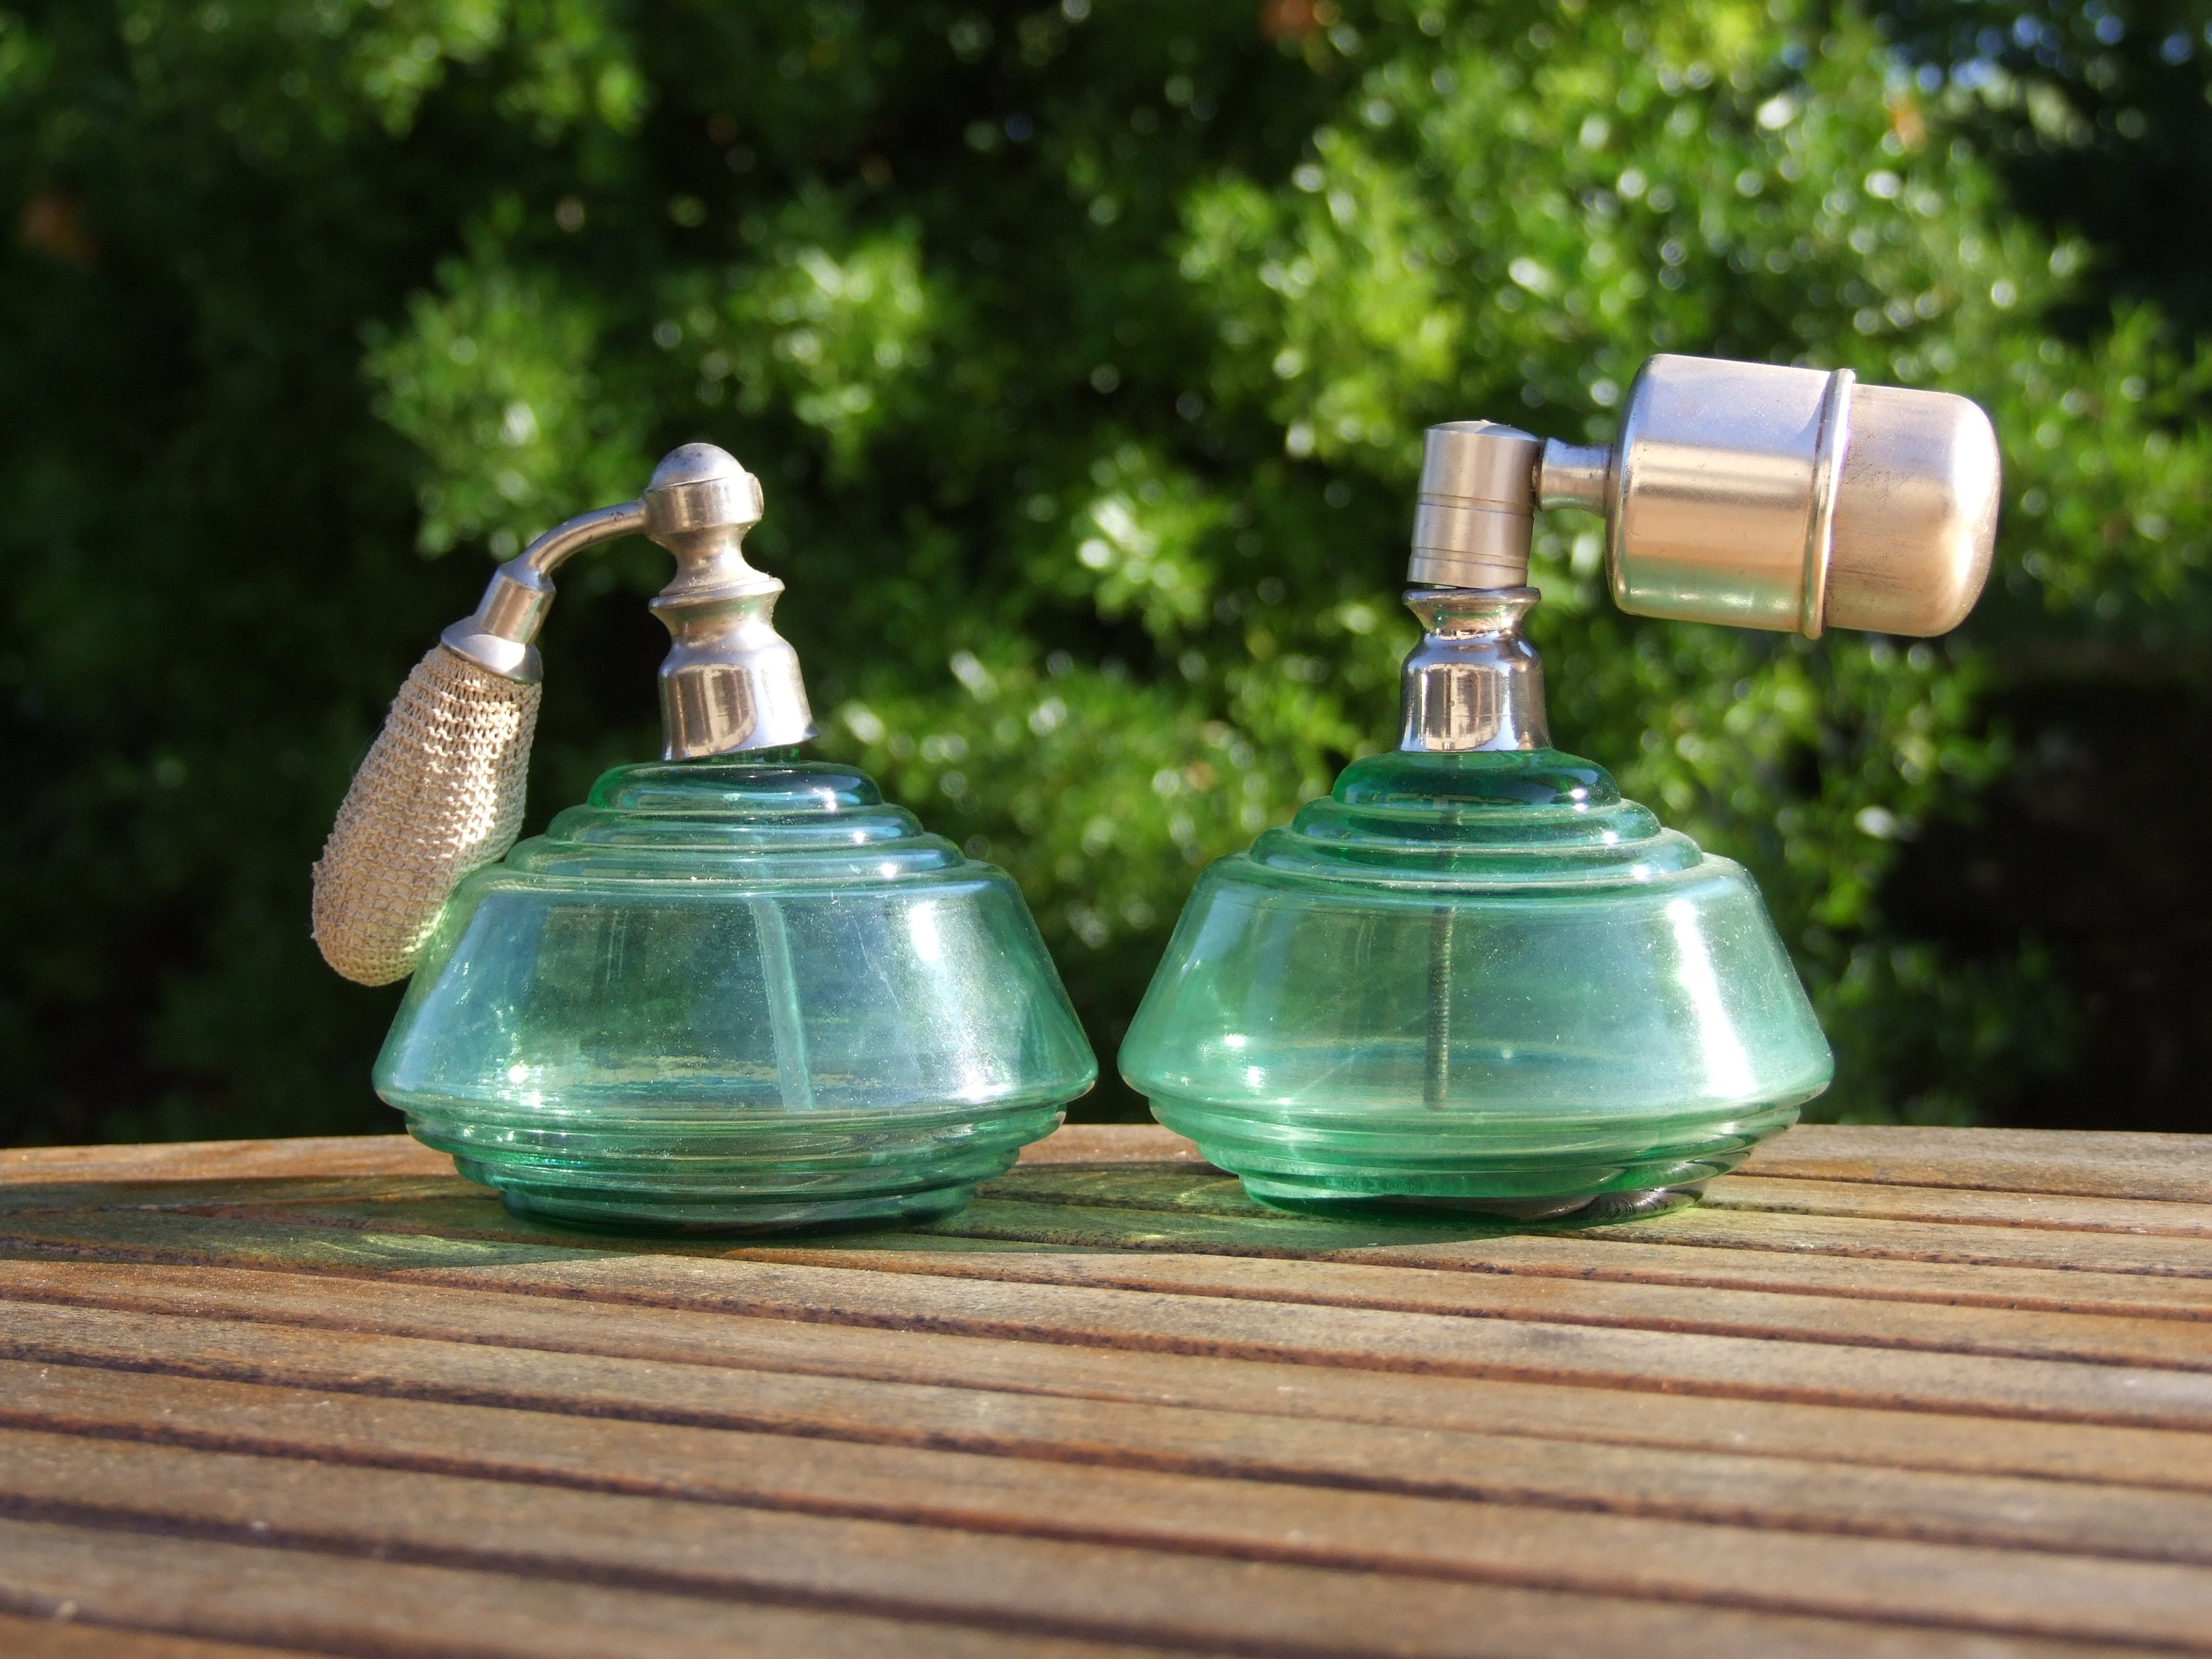 2 green glass and stainless steel spray bottles